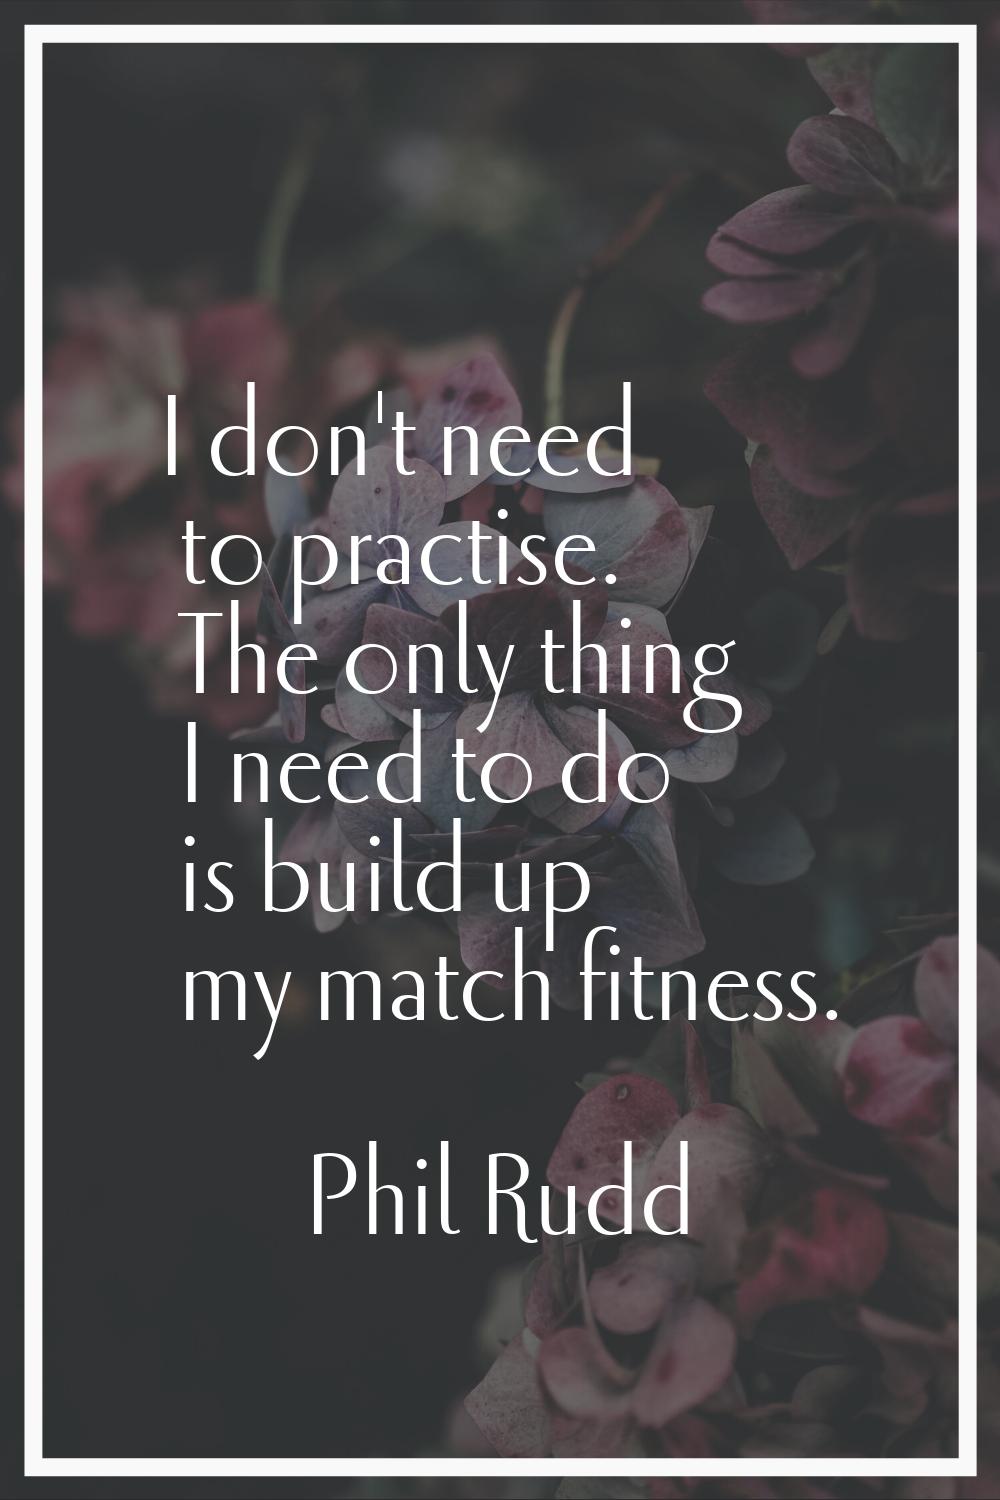 I don't need to practise. The only thing I need to do is build up my match fitness.